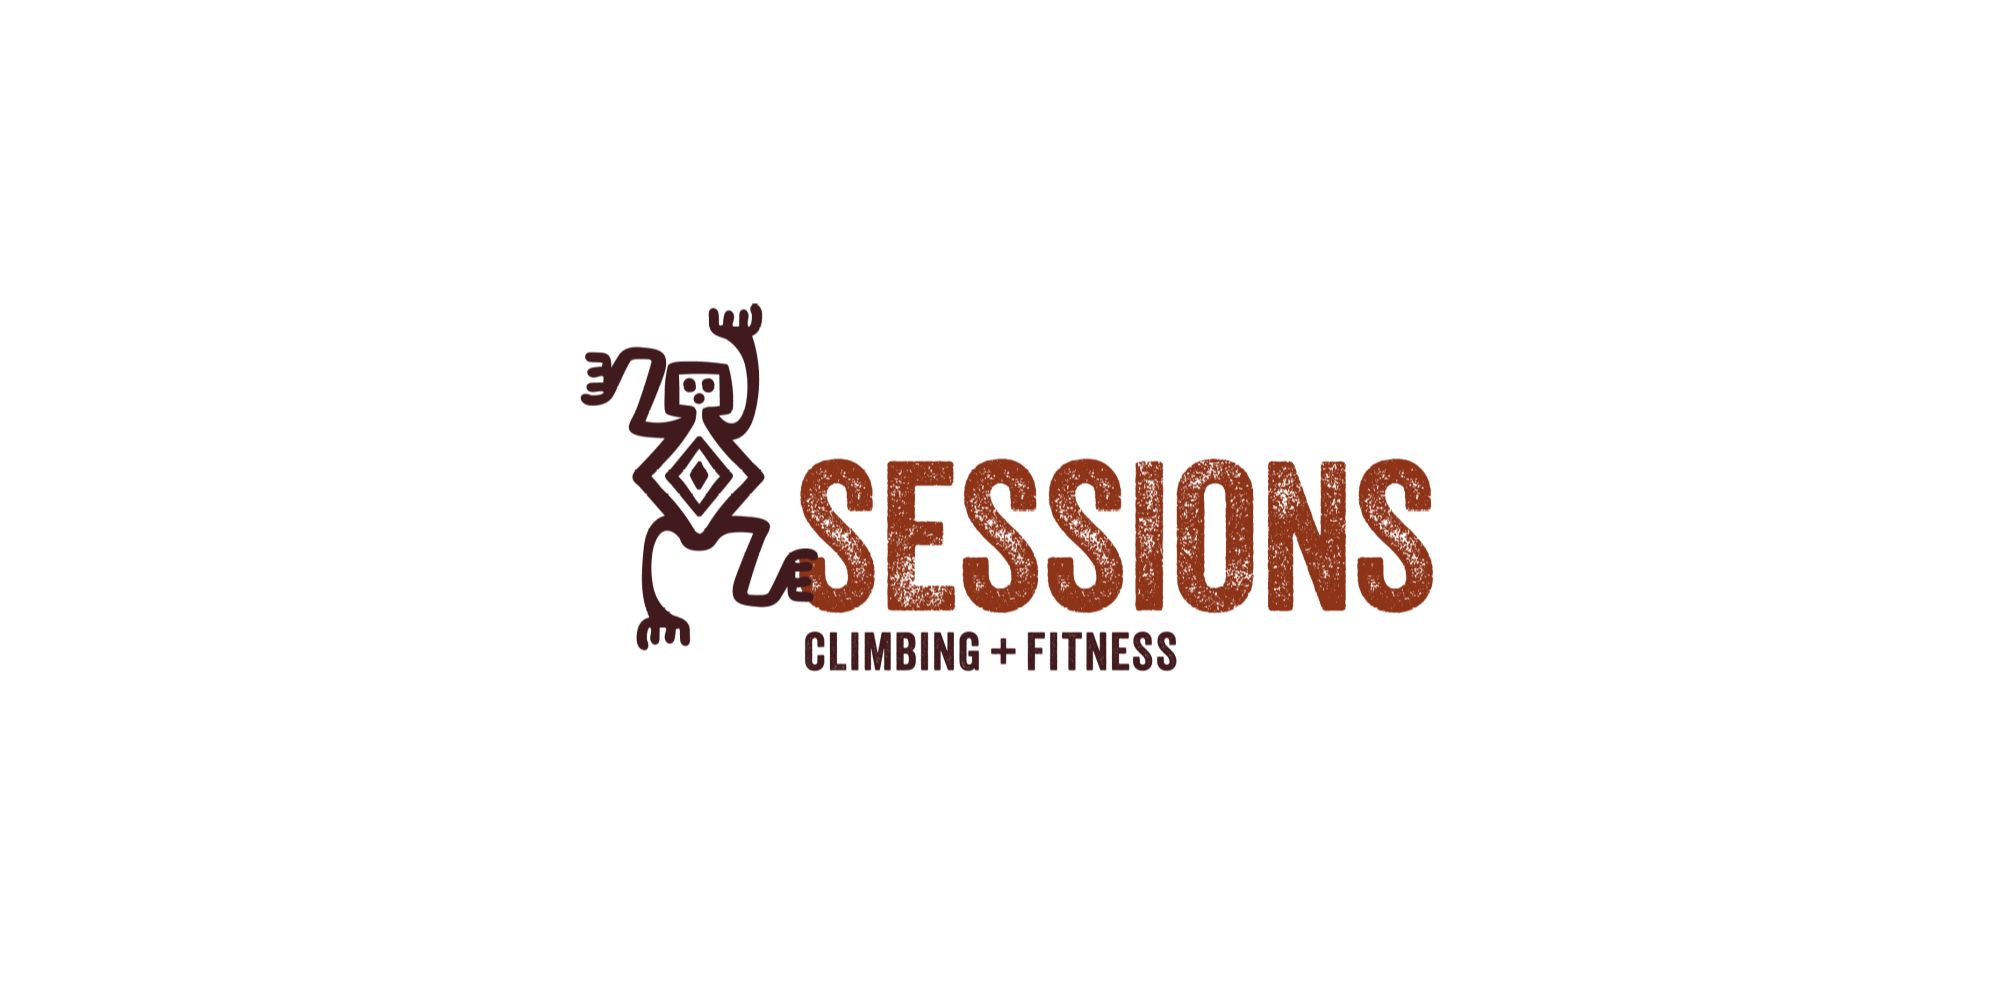 Become Stronger, Every Session - Sessions Climbing + Fitness